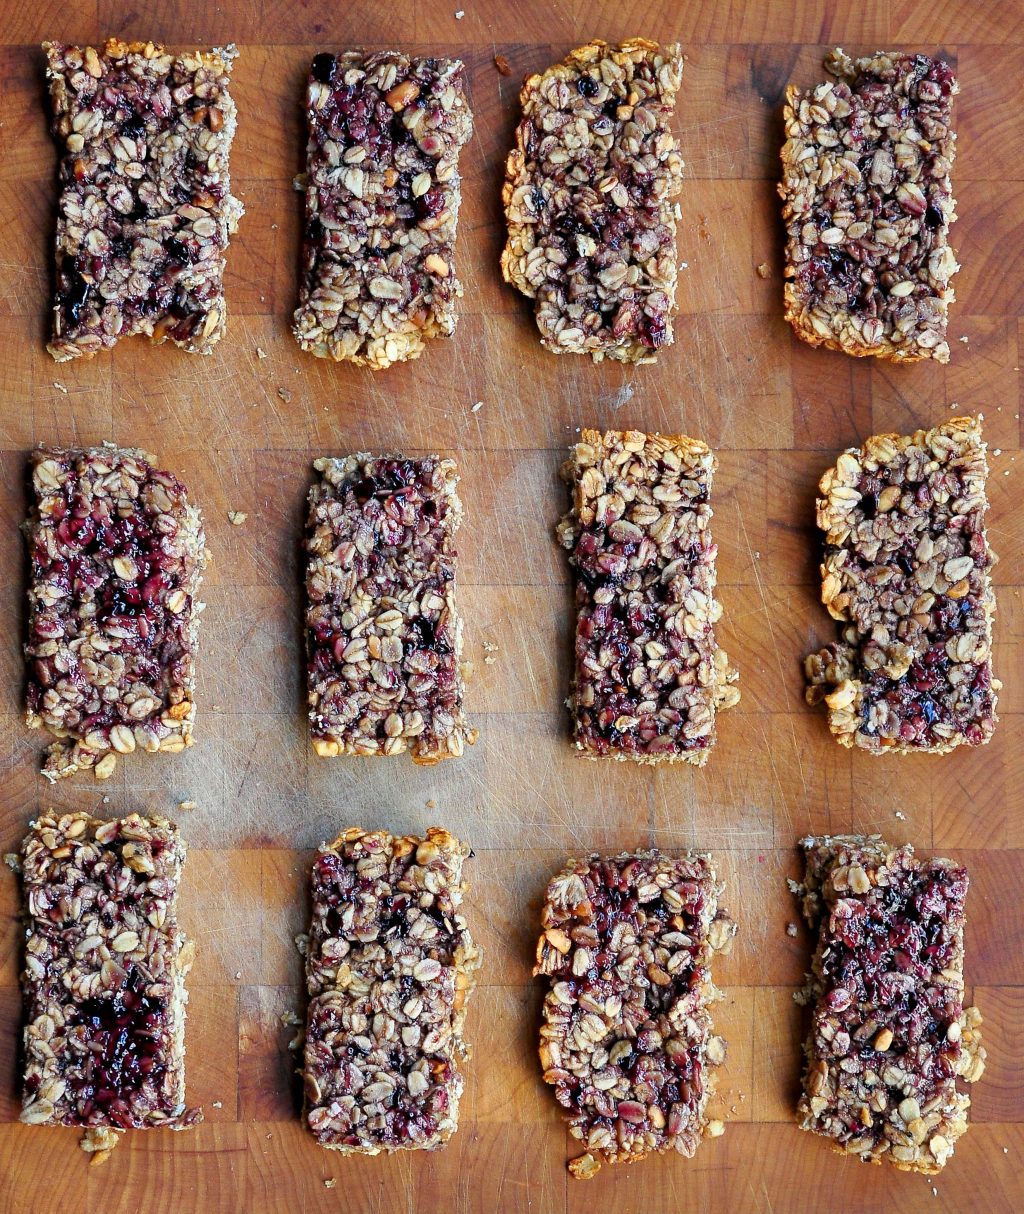 peanut butter and jelly granola bars on laying on a wooden board